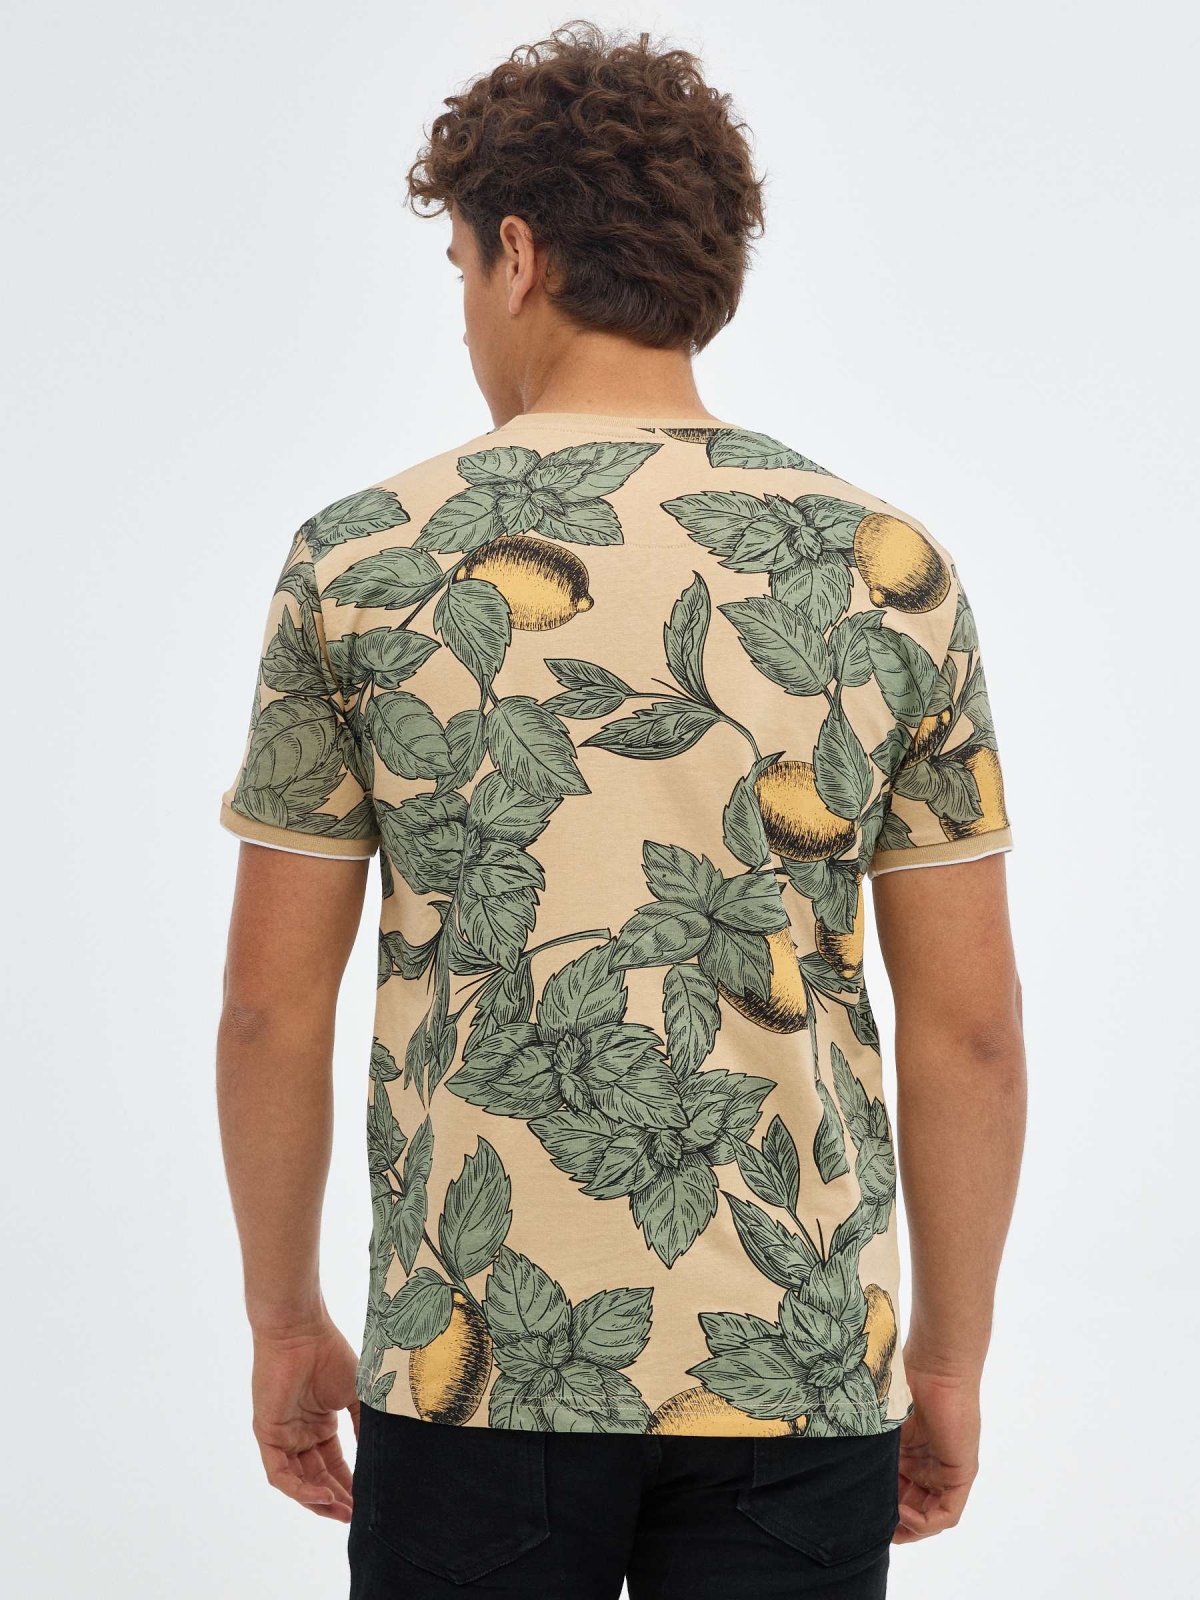 Fruit print t-shirt sand middle back view